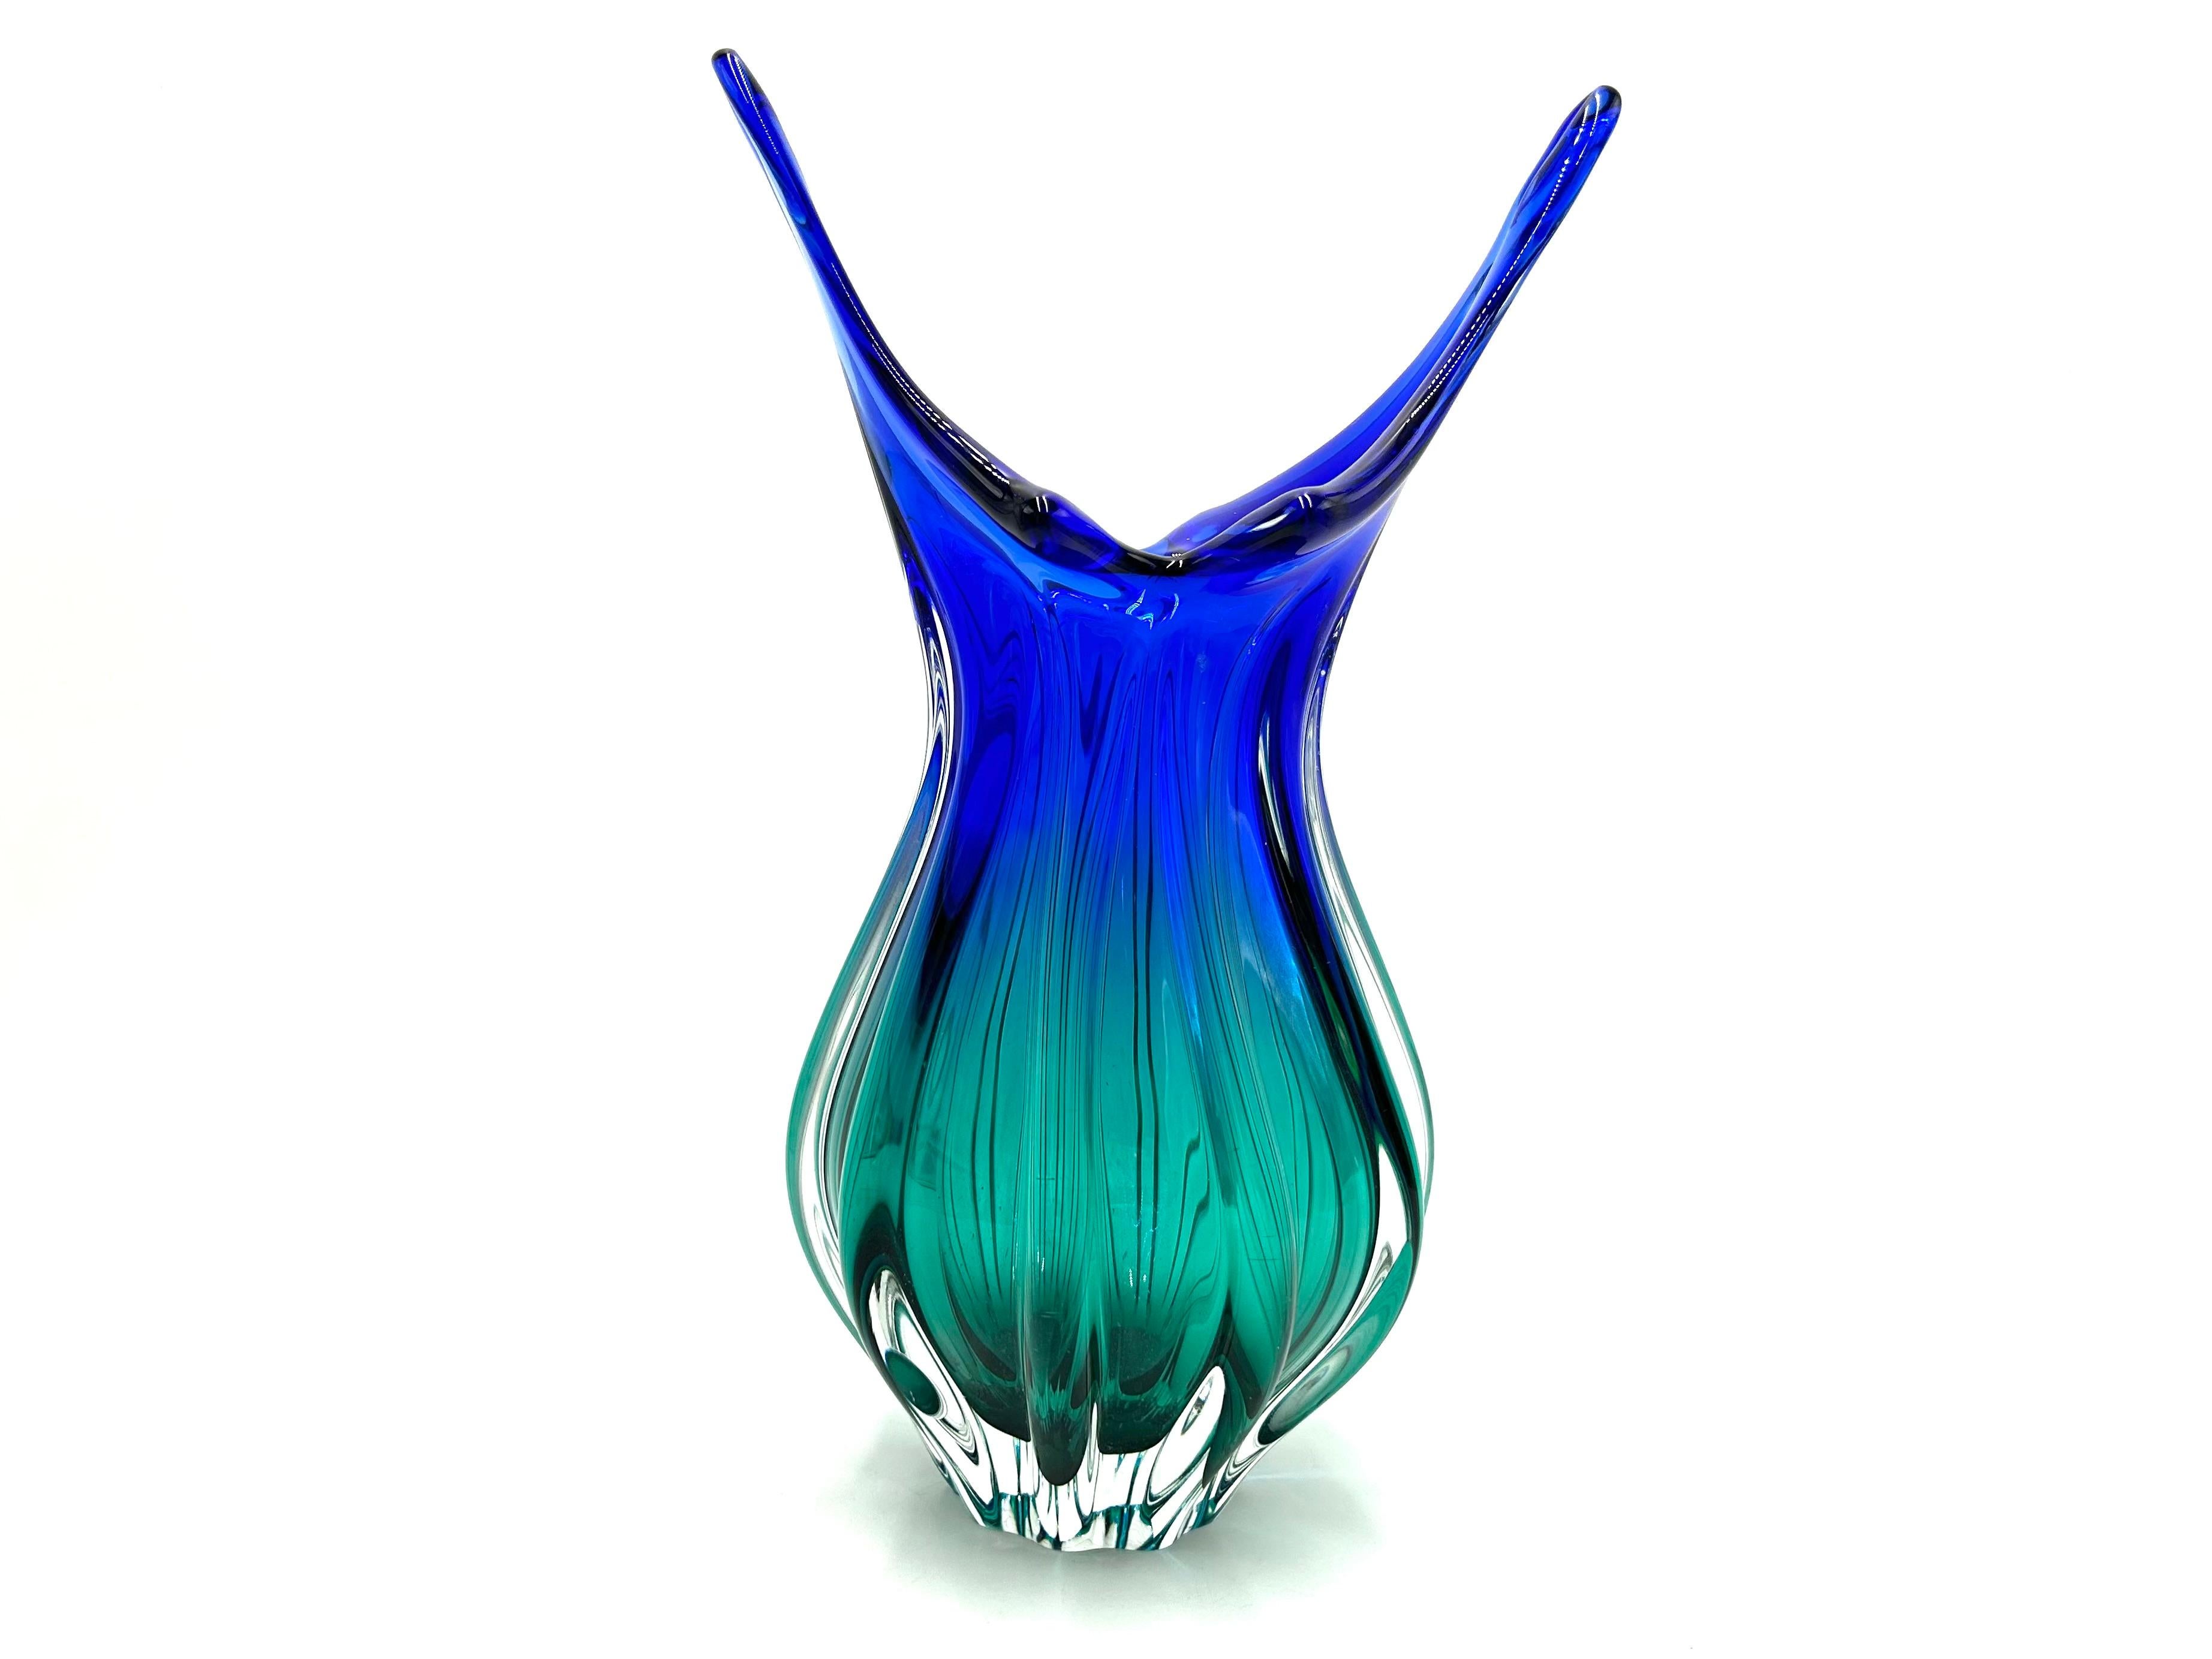 A glass vase with a unique shape in beautiful shades of green and blue
Produced in the Czech Republic in the 1960s in Huta Chribska.
Very good condition
height: 32cm
width: 19cm
depth: 11cm